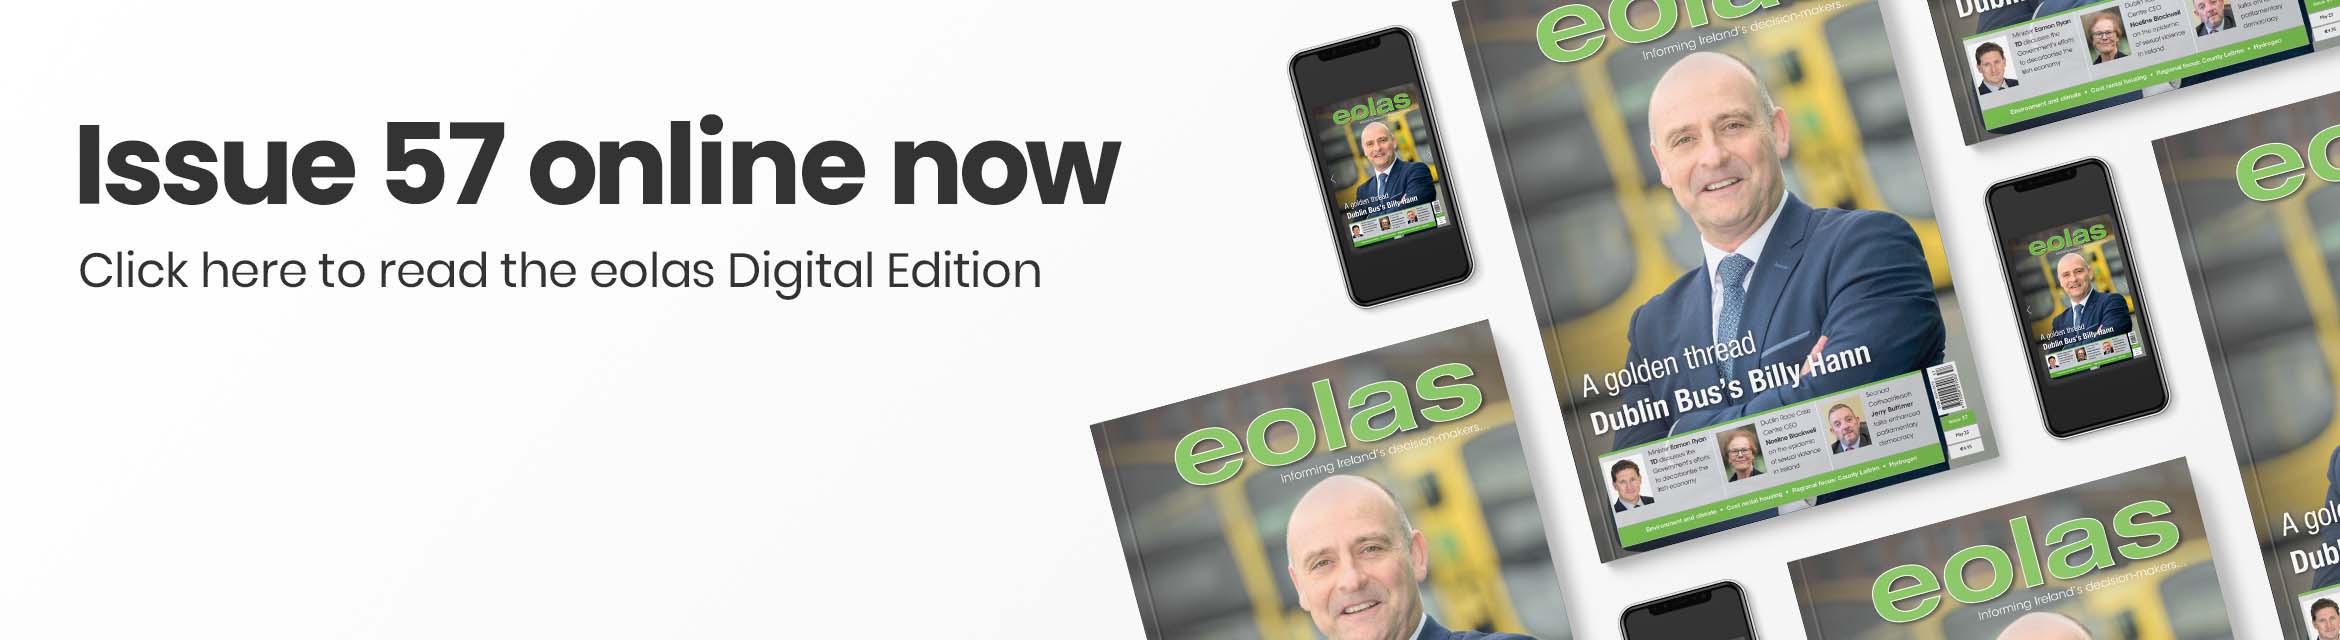 Issue 57 online now • Read the eolas Digital Edition